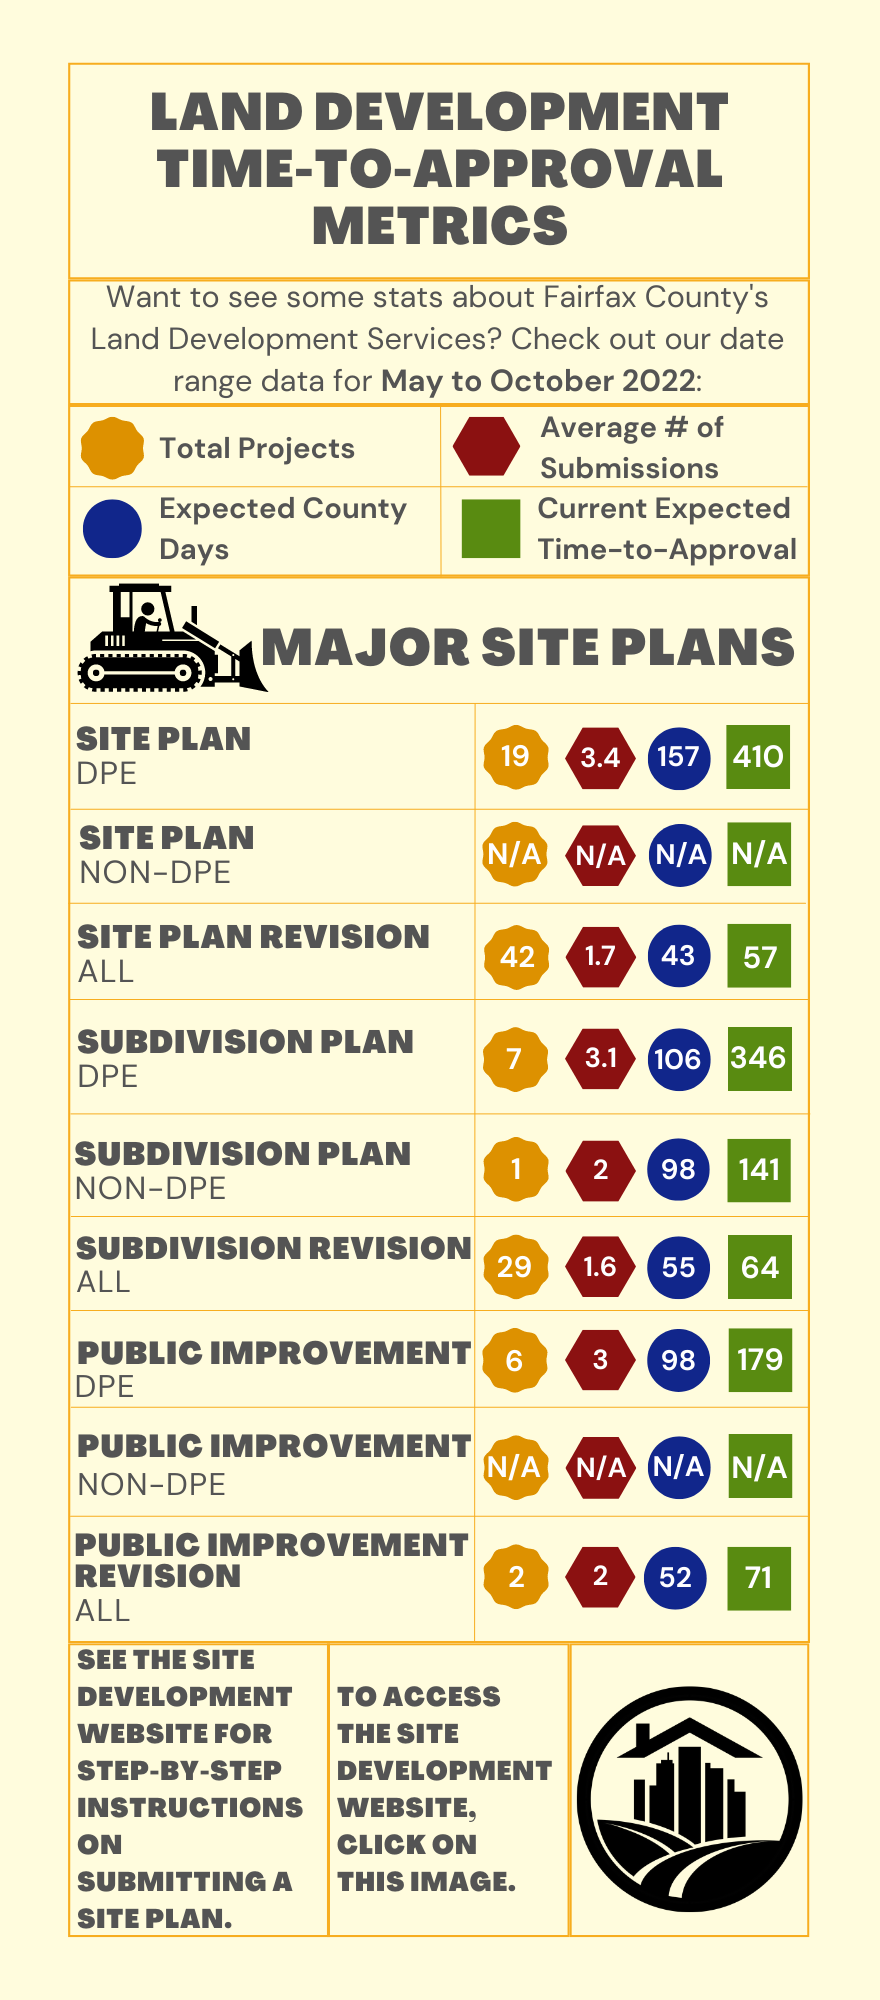 Site Plans Time-to-Approval